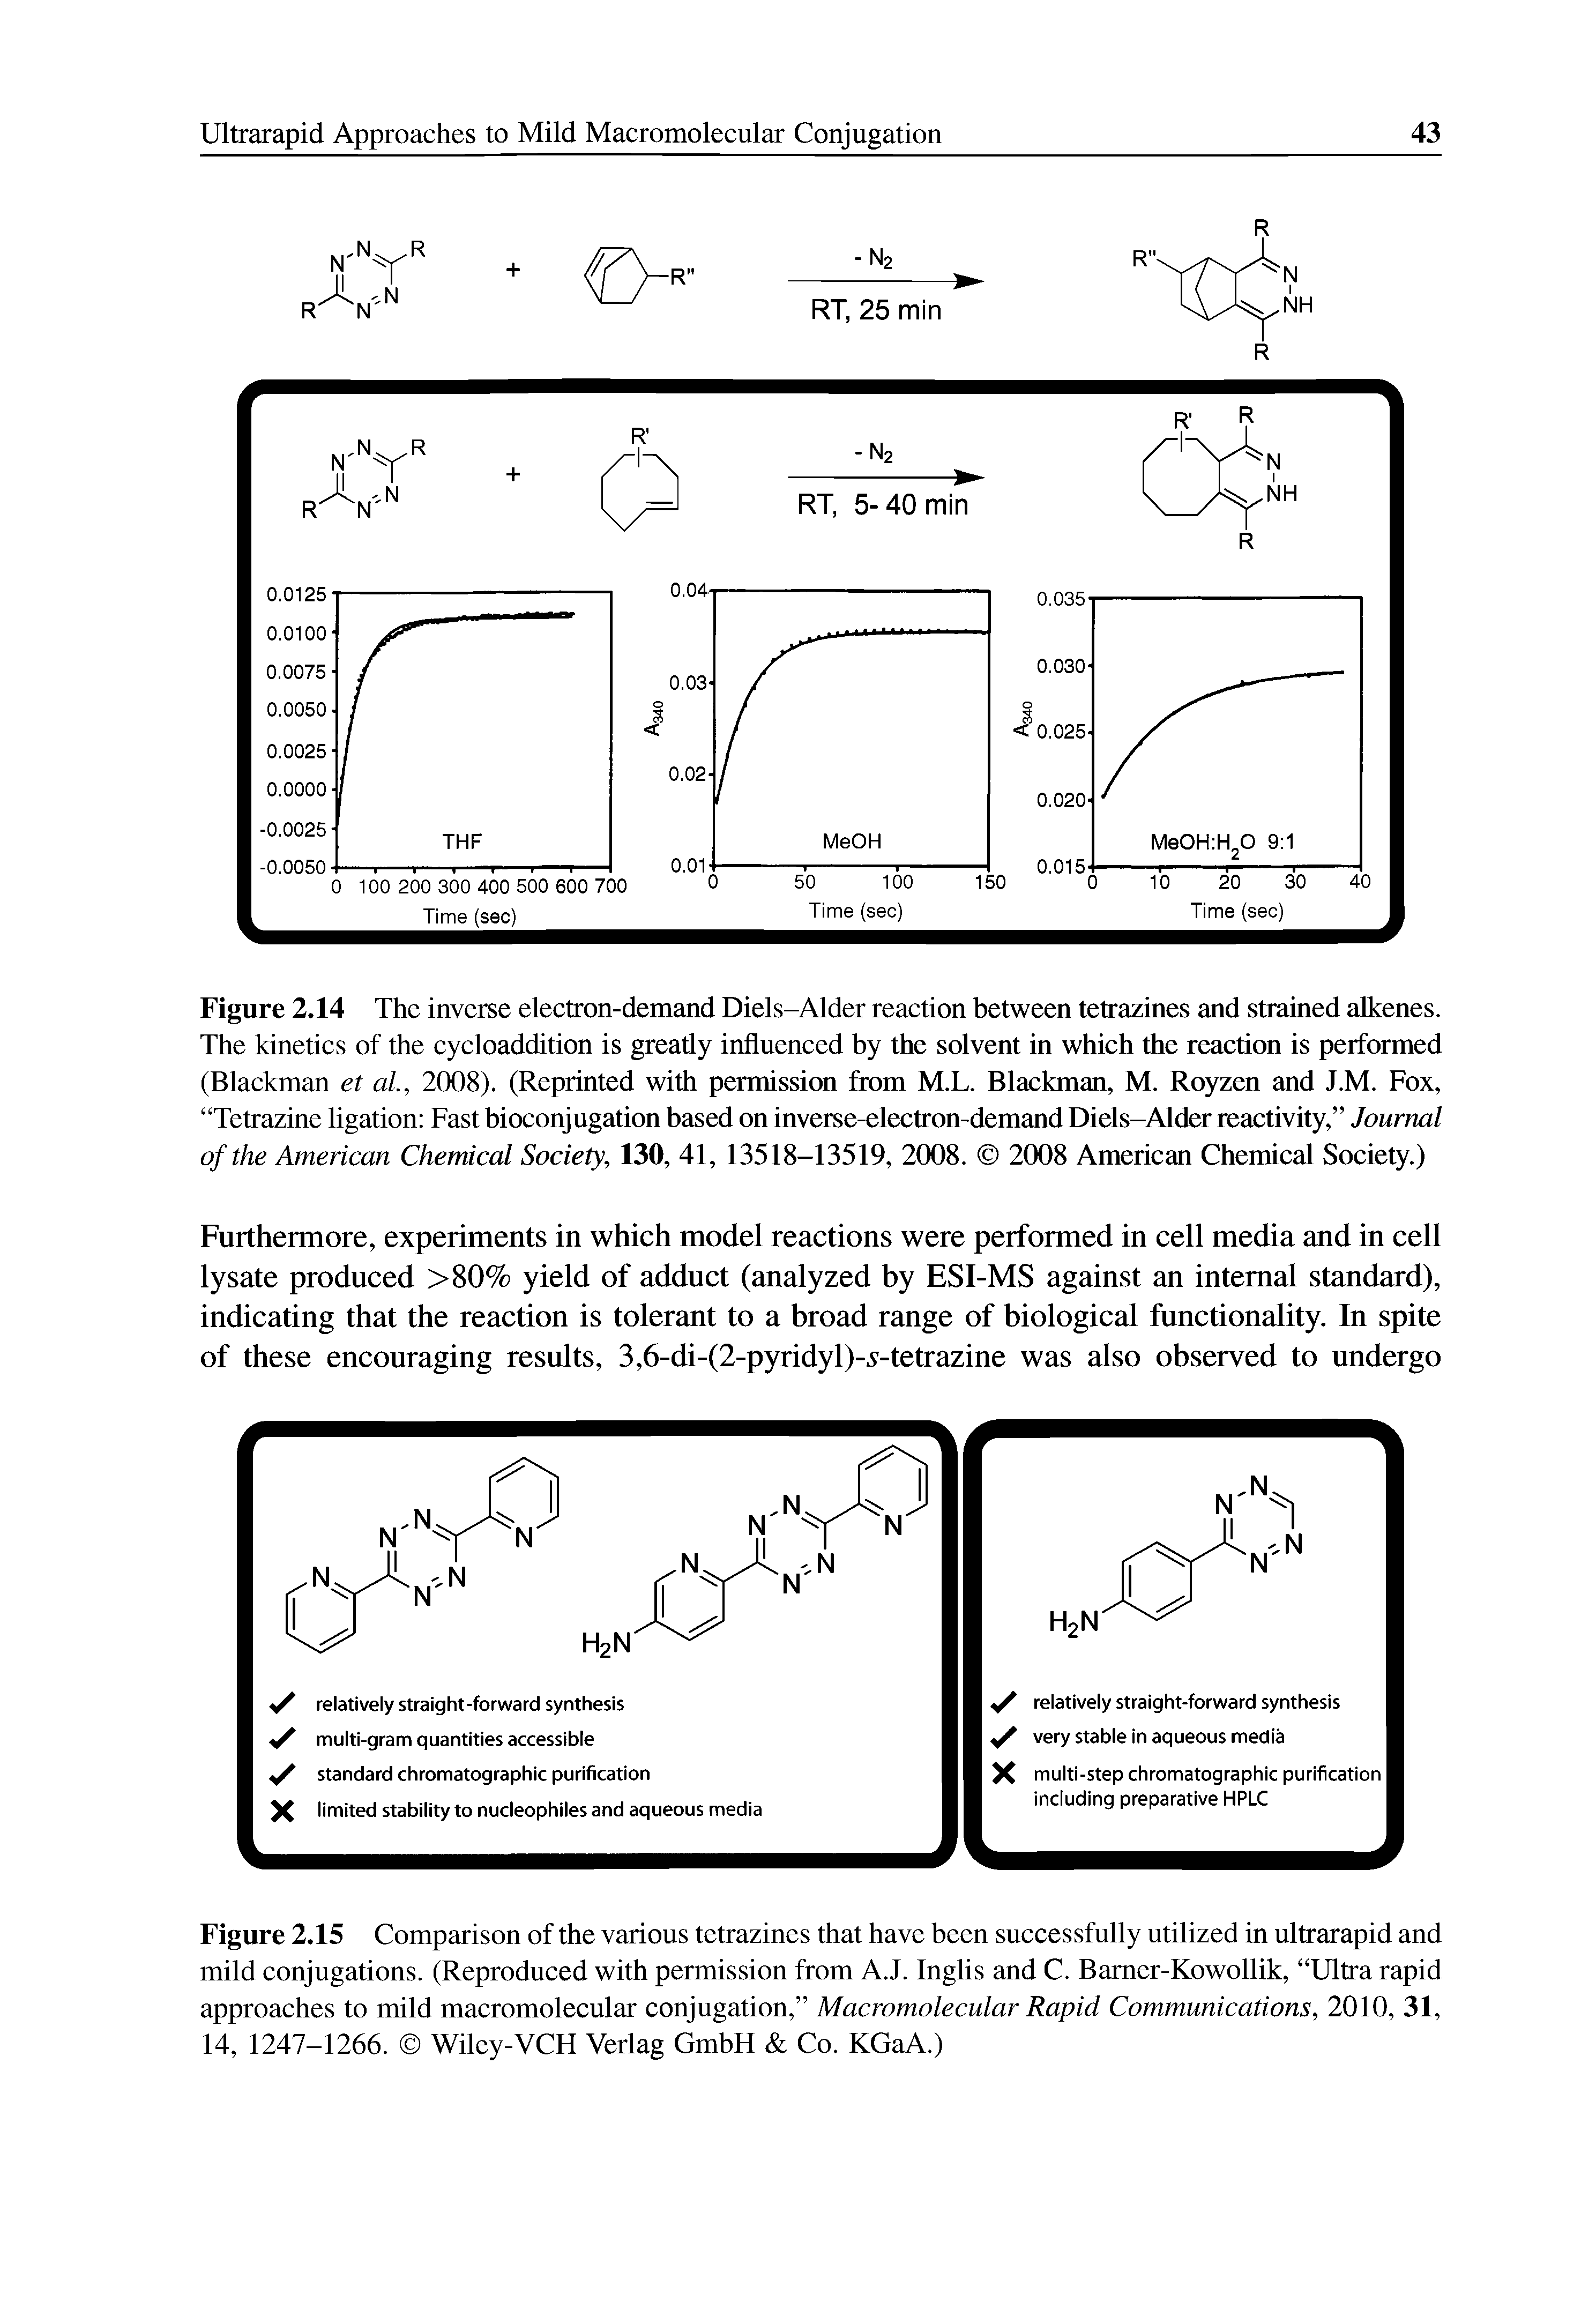 Figure 2.14 The inverse electron-demand Diels-Alder reaction between tetrazines and strained alkenes. The kinetics of the cycloaddition is greatly influenced by the solvent in which the reaction is performed (Blackman et al, 2008). (Reprinted with permission from M.L. Blackman, M. Royzen and J.M. Fox, Tetrazine ligation Fast bioconjugation based on inverse-electron-demand Diels-Alderneactivity, Journal of the American Chemical Society, 130, 41, 13518-13519, 2008. 2008 American Chemical Society.)...